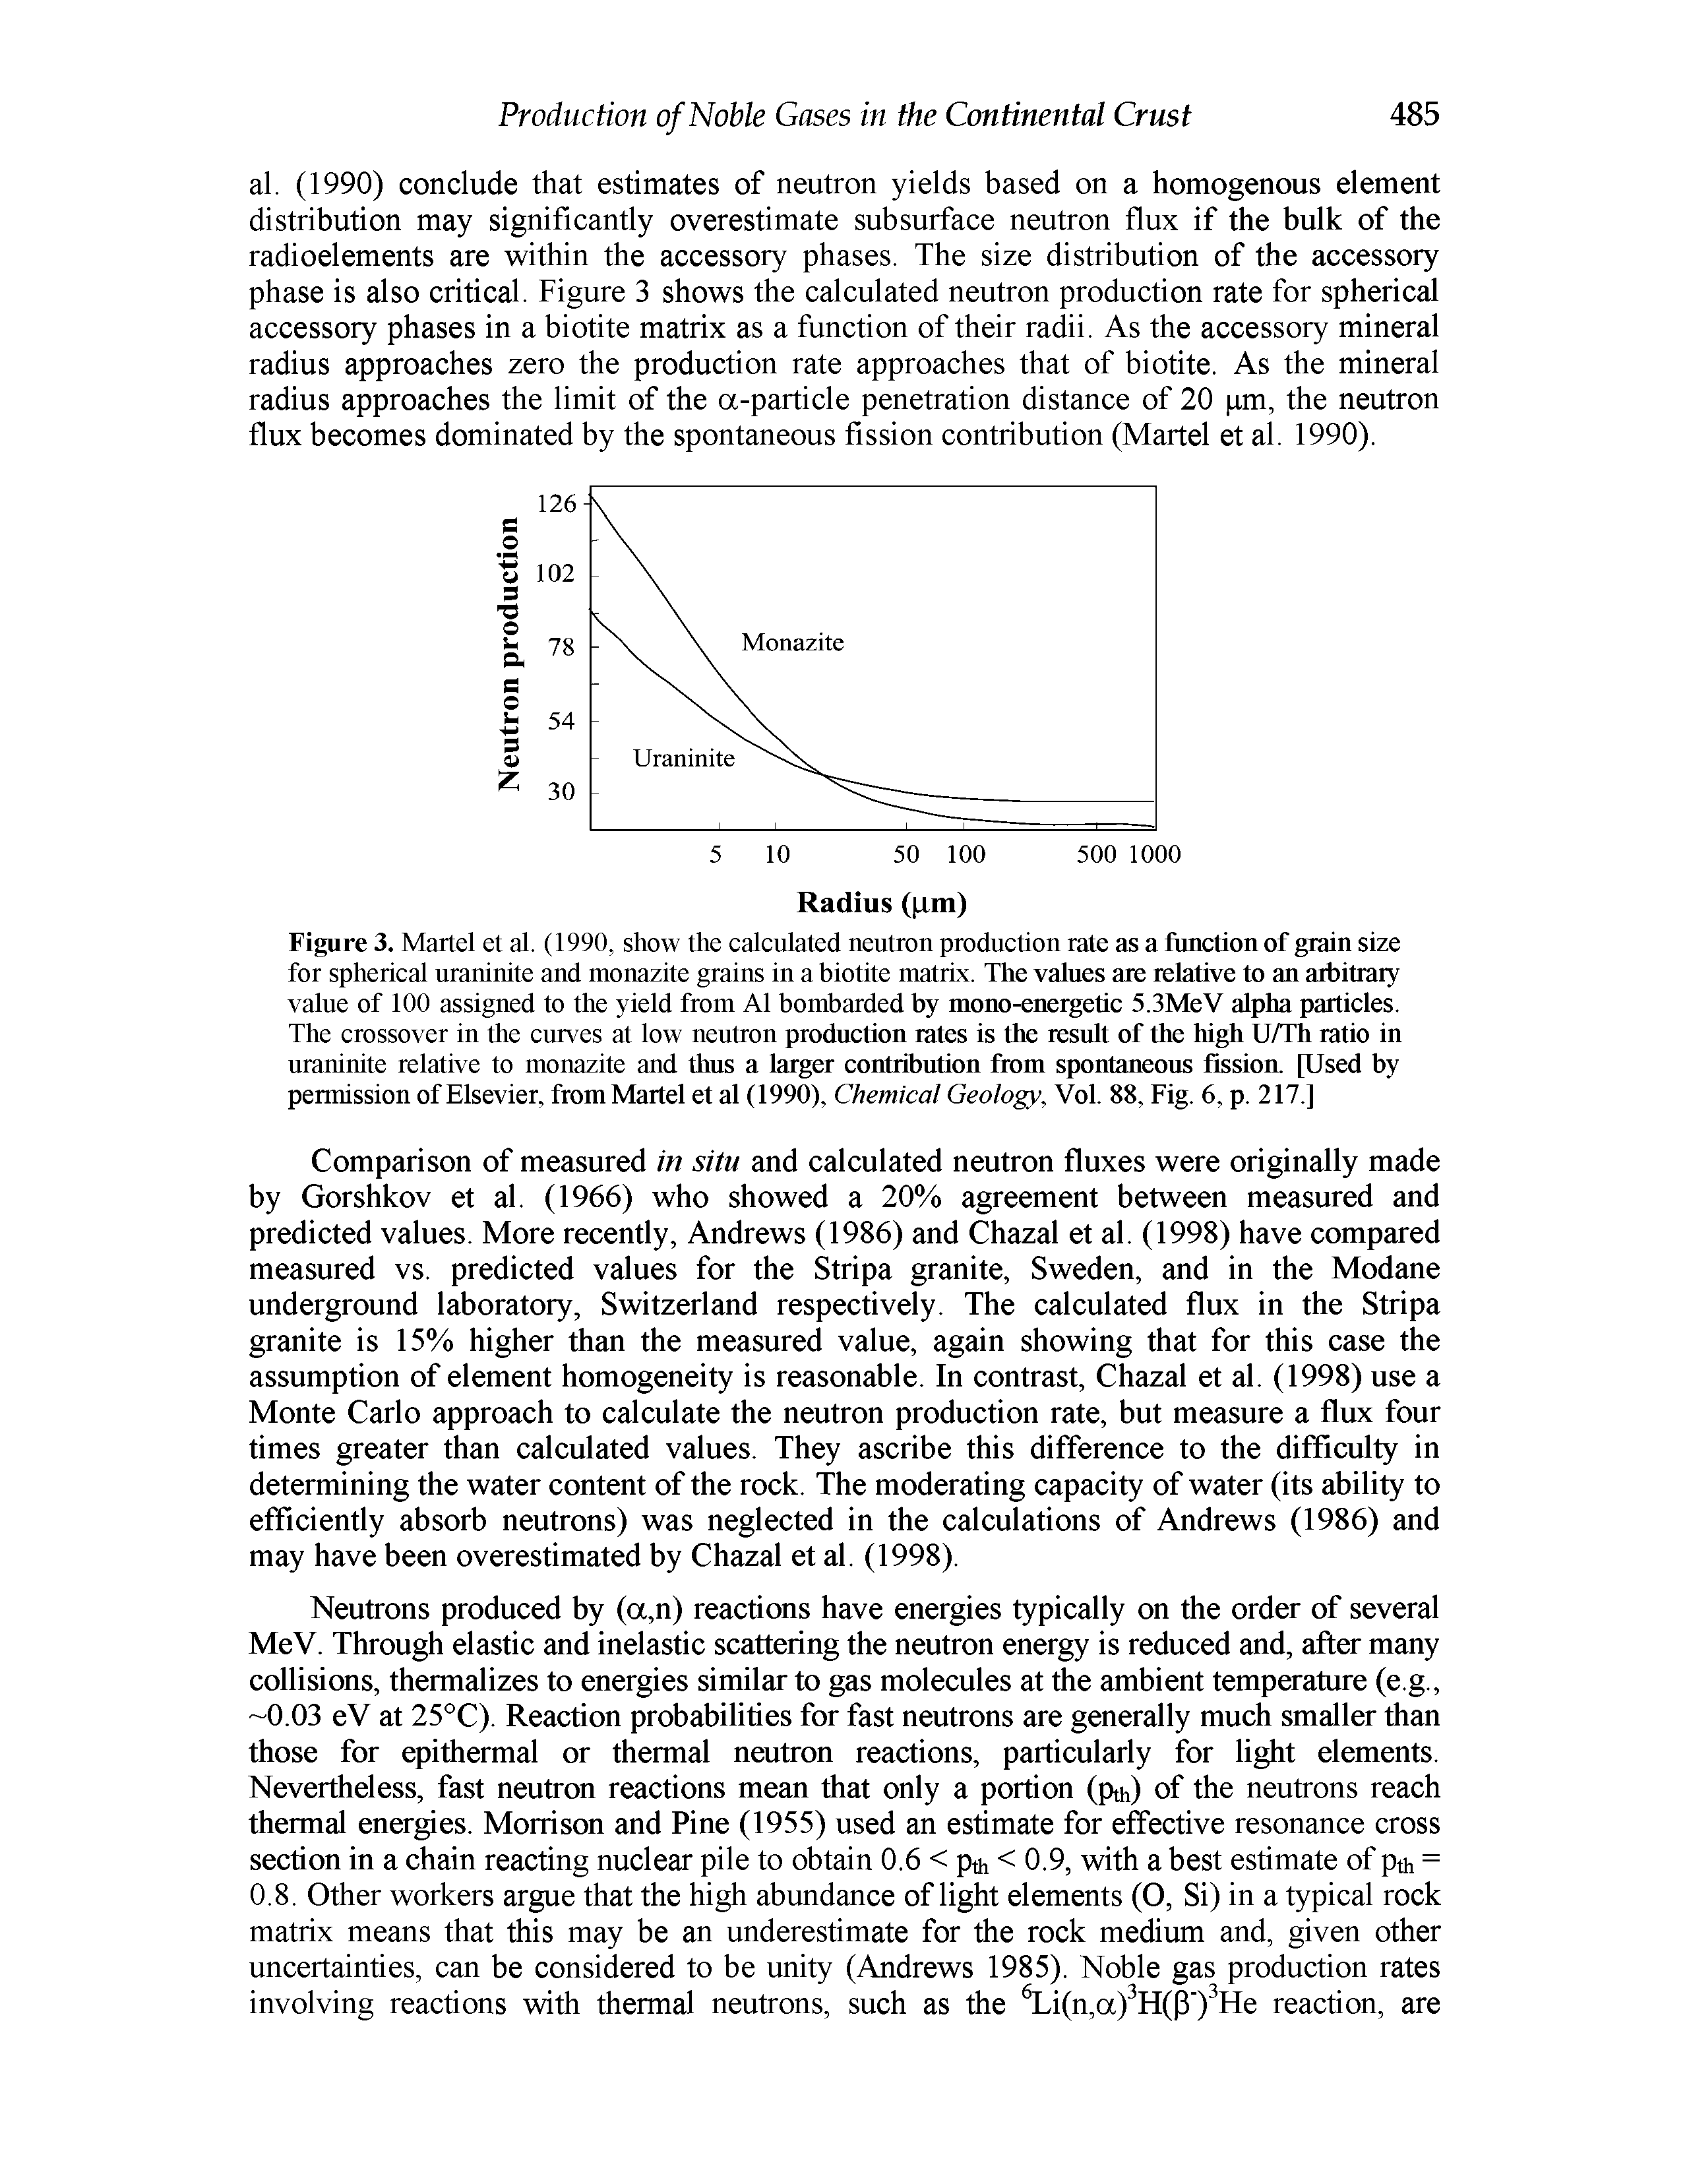 Figure 3. Martel et al. (1990, show the calculated neutron production rate as a function of grain size for spherical uraninite and monazite grains in a biotite matrix. The valnes are relative to an arbitrary value of 100 assigned to the yield from Al bombarded by mono-energetic 5.3MeV alpha particles.